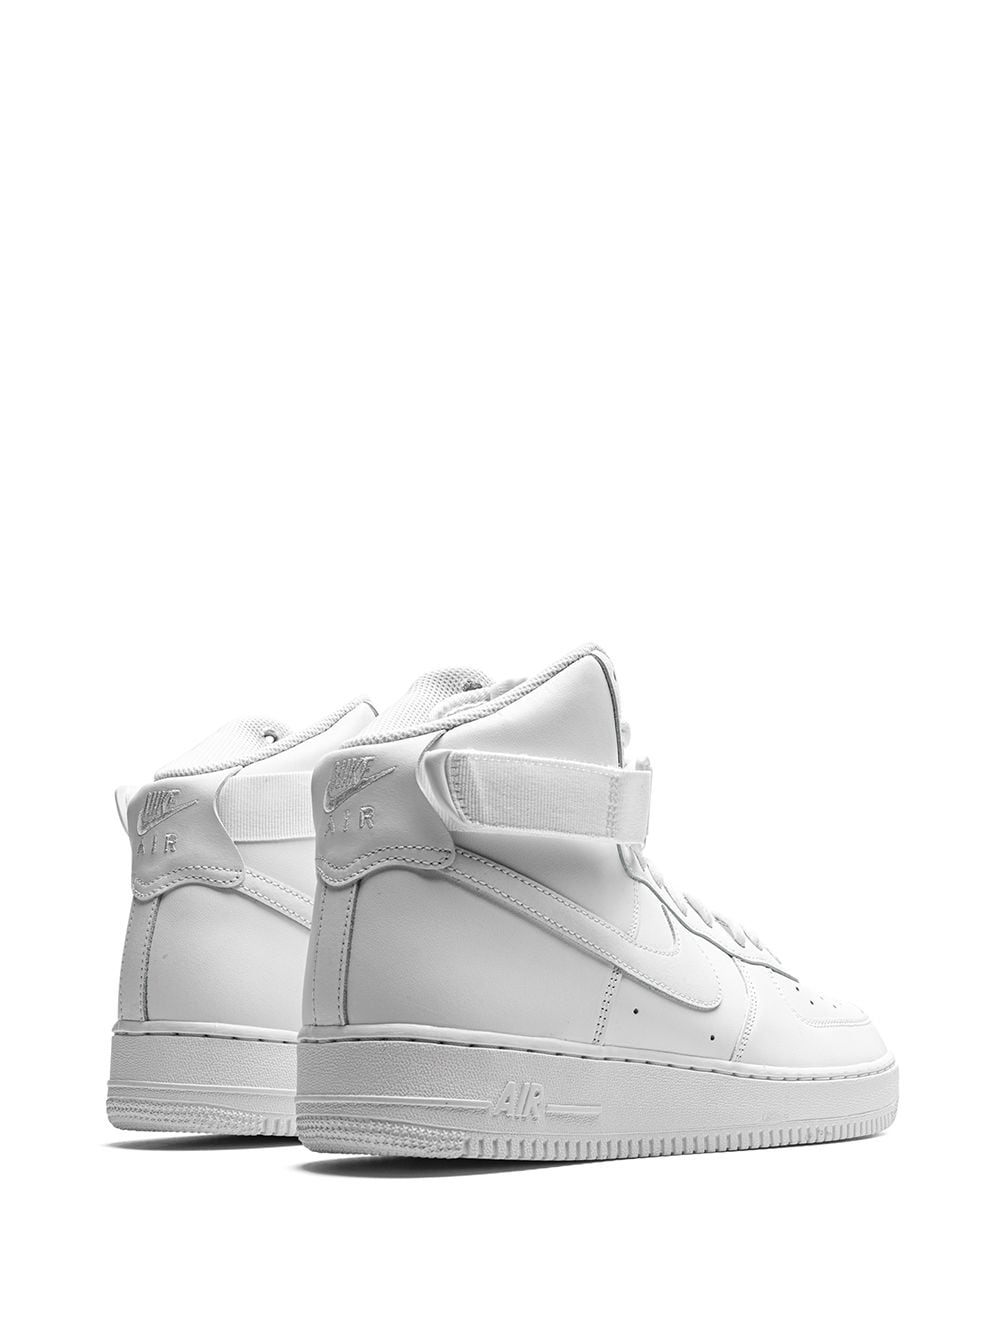 Nike Air Force 1 High White Men Size 16 Casual Shoes CW2290-111 New Triple  White